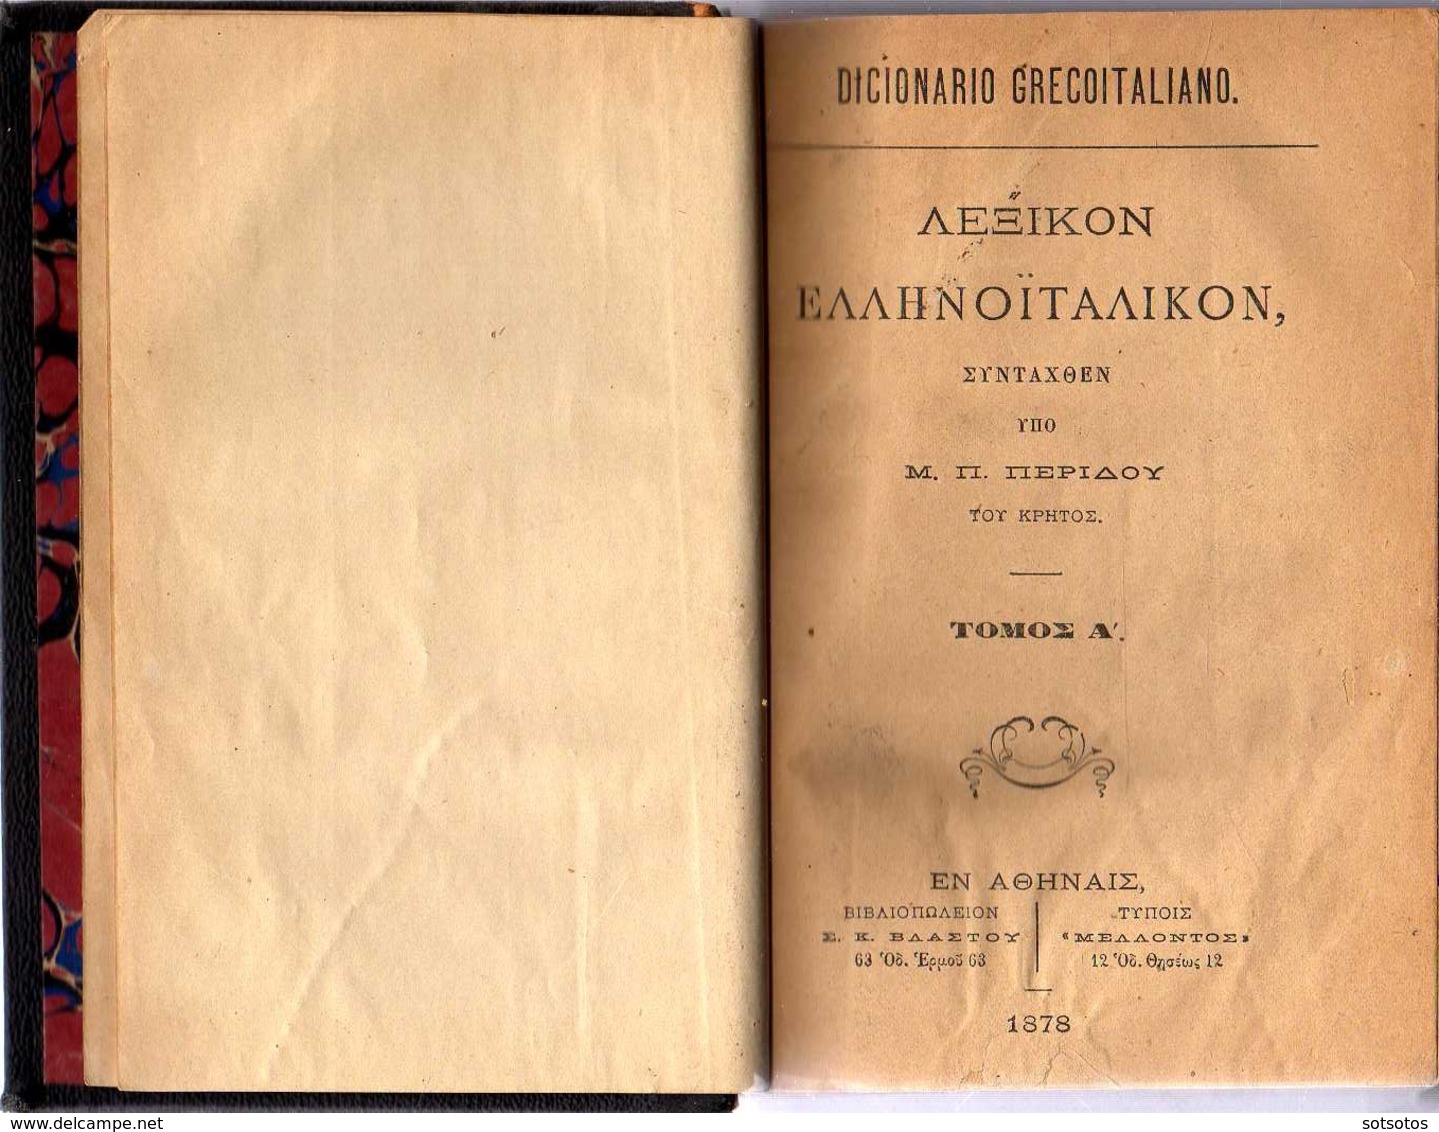 GREEK BOOK: GREC-ΙΤΑLΙΑΝ Lexicon – M. PERIDIS (Athens 1878) - 1870 Pages (12X18 Cent.) Covers Without Spines But Text Ve - Woordenboeken